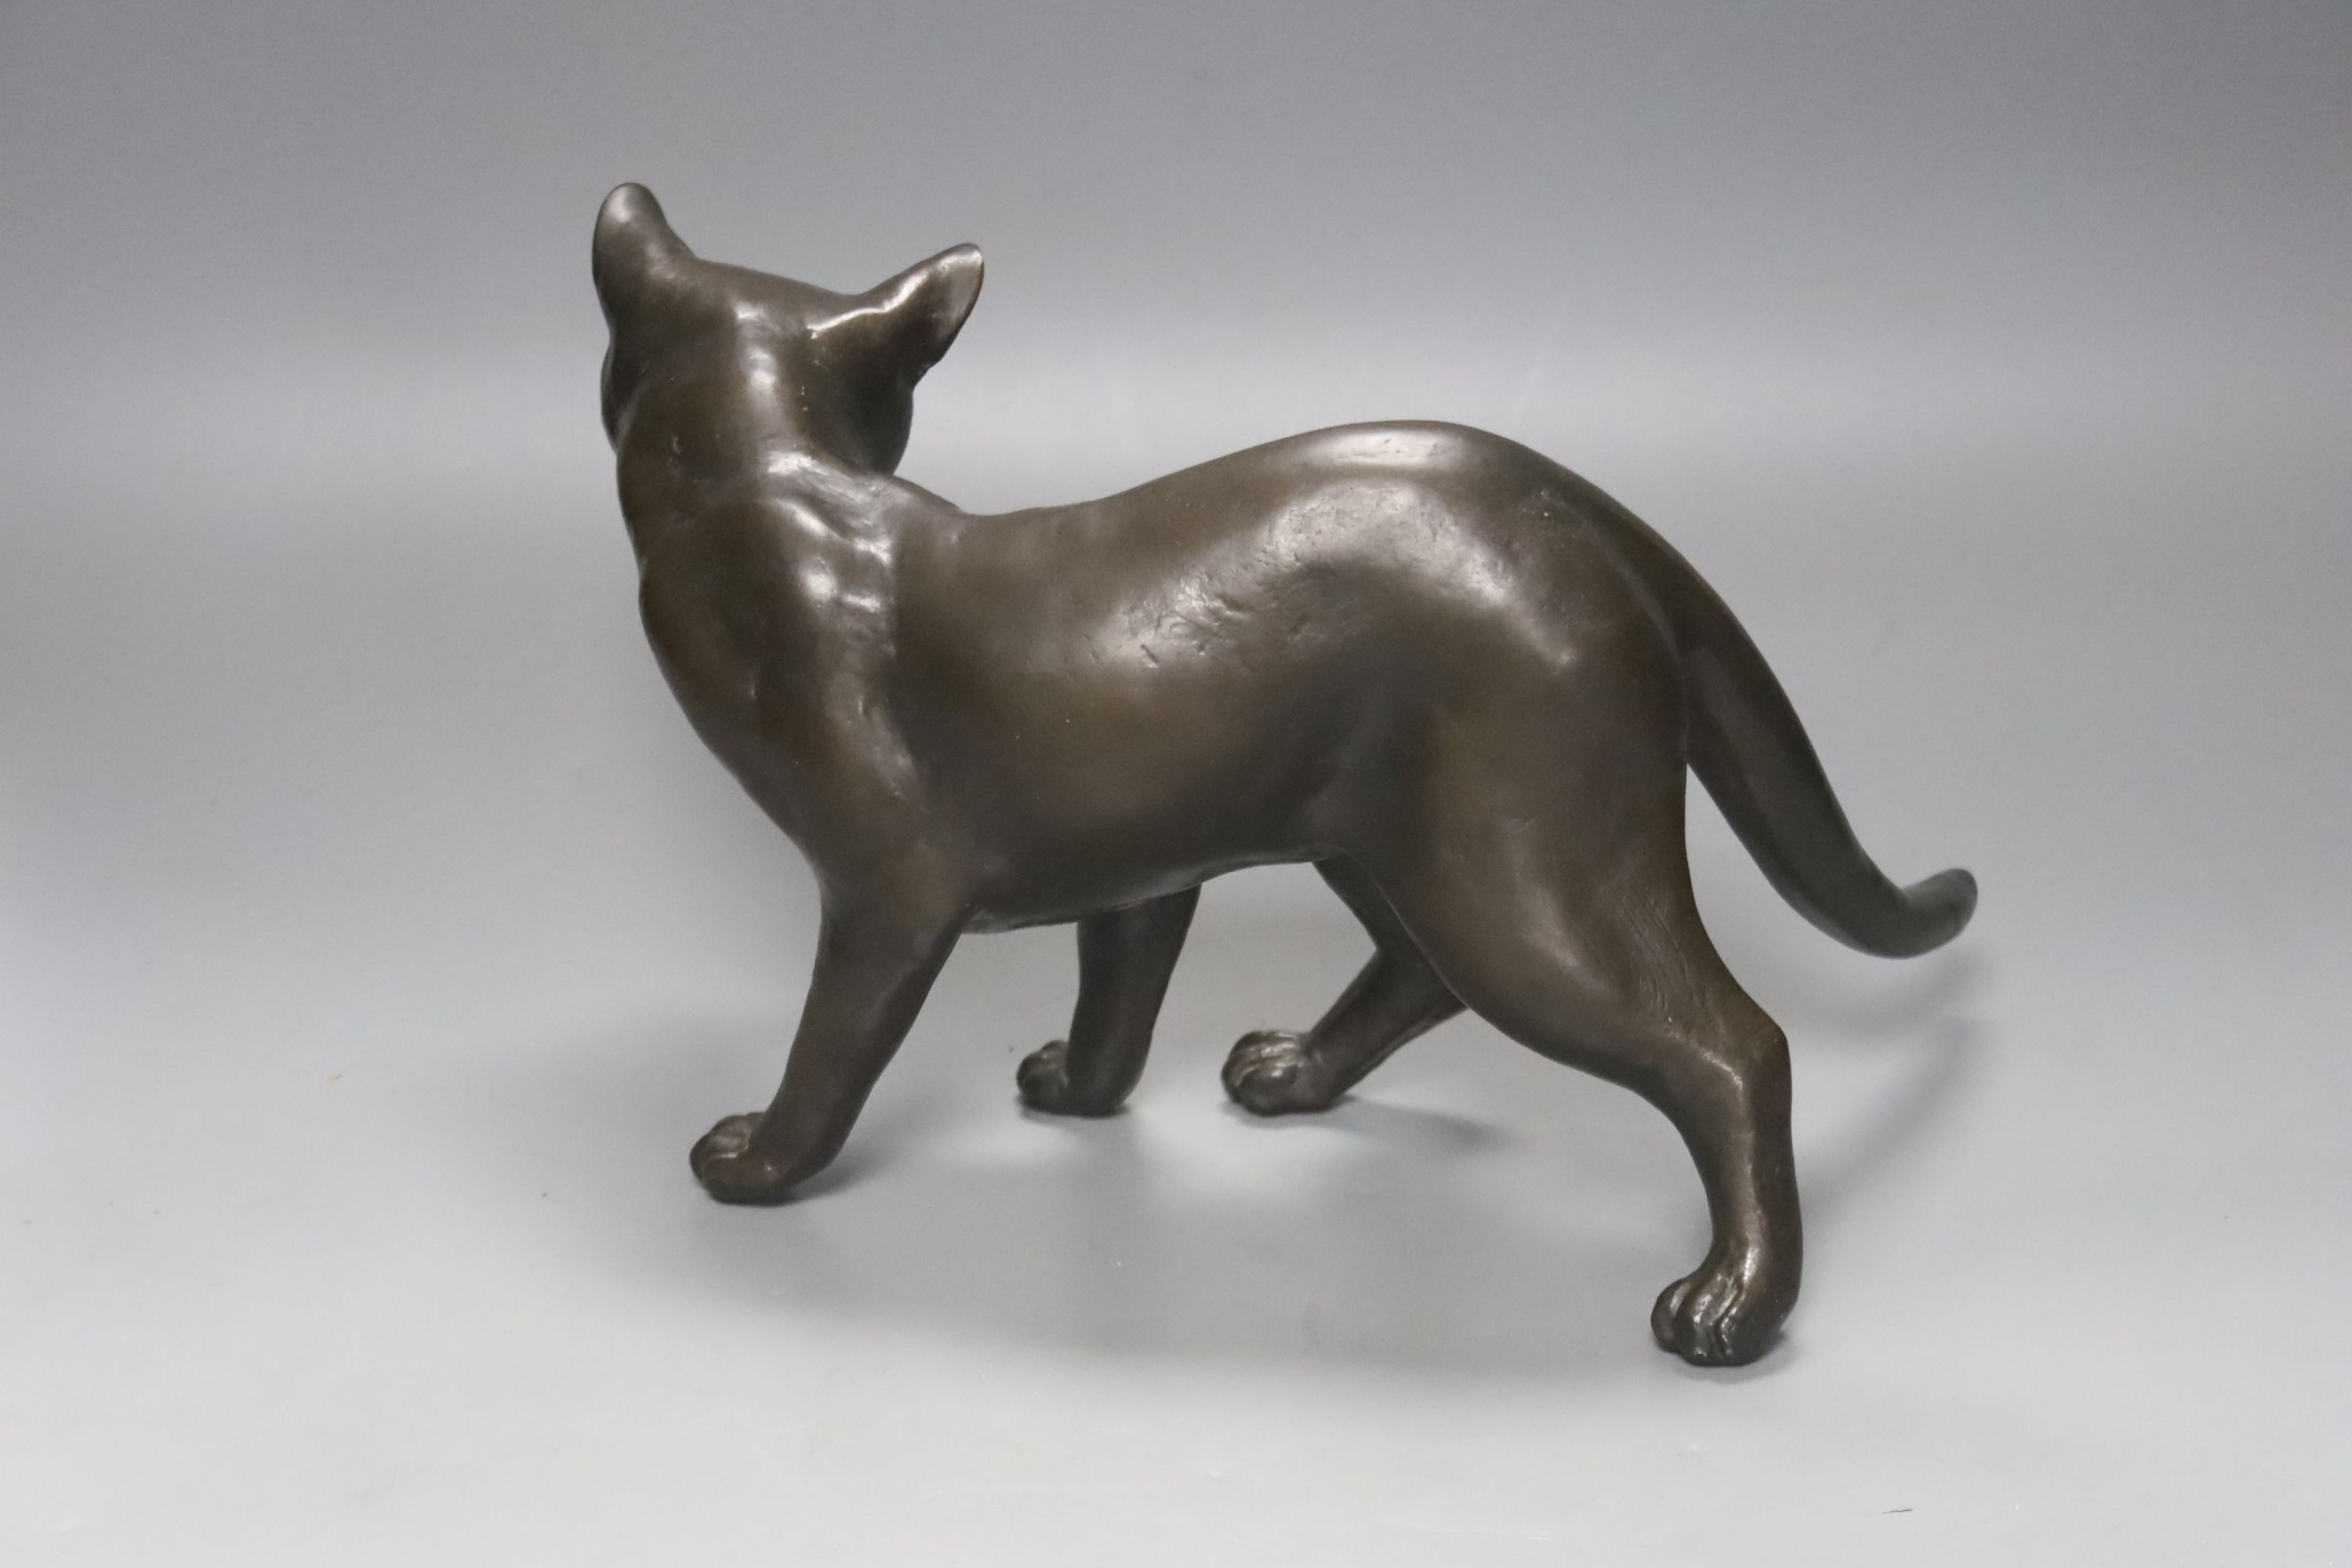 A Tom Merrifield bronze cat, signed and numbered 7/95, 28cm long